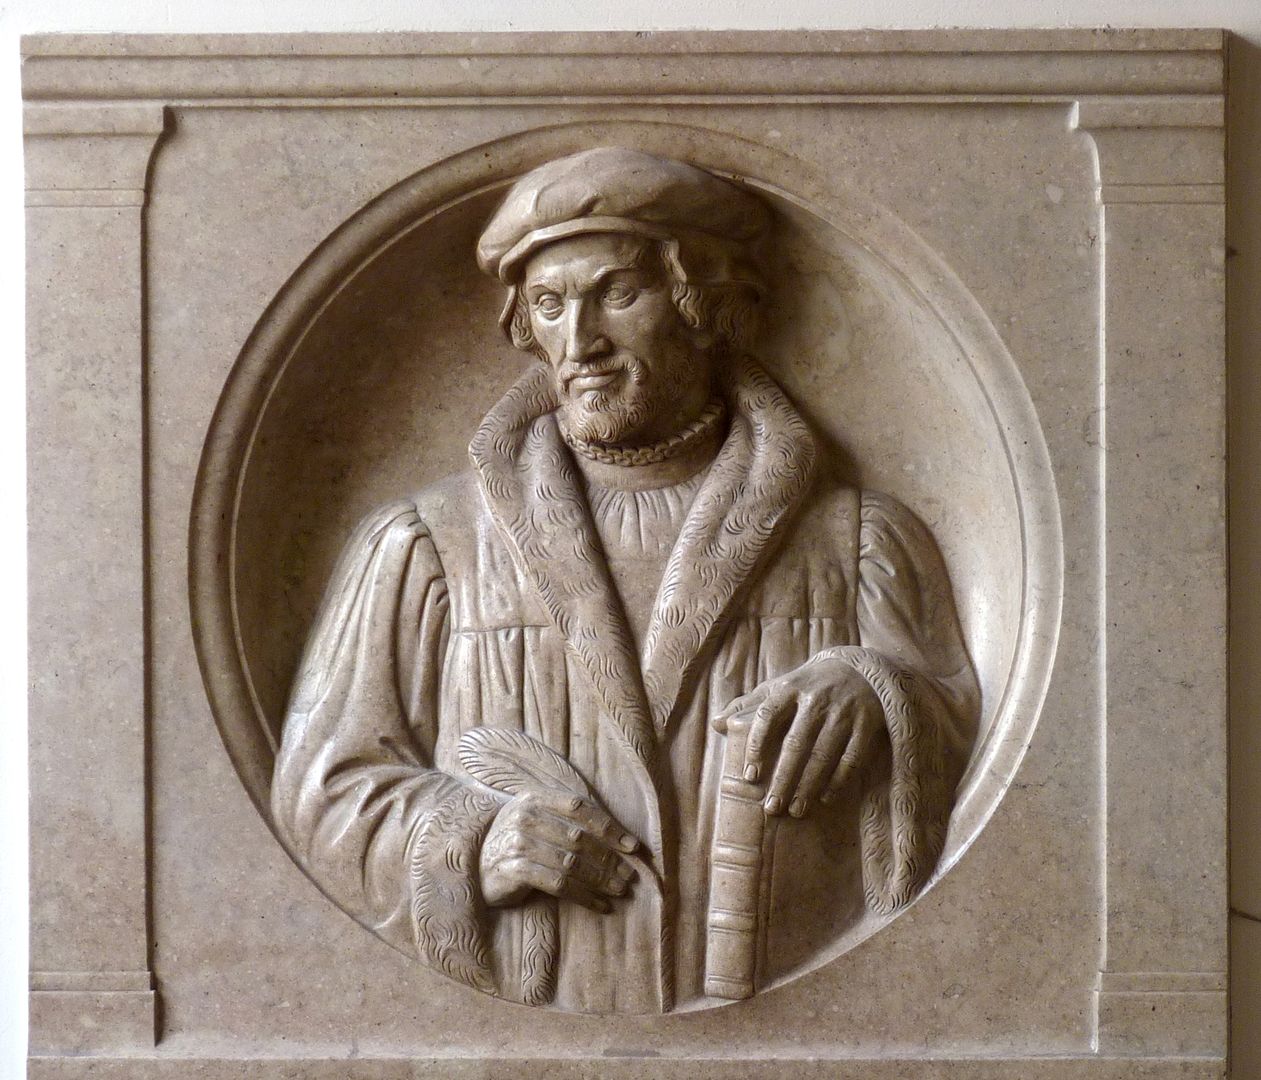 Melanchthon Relief image of Melanchthon